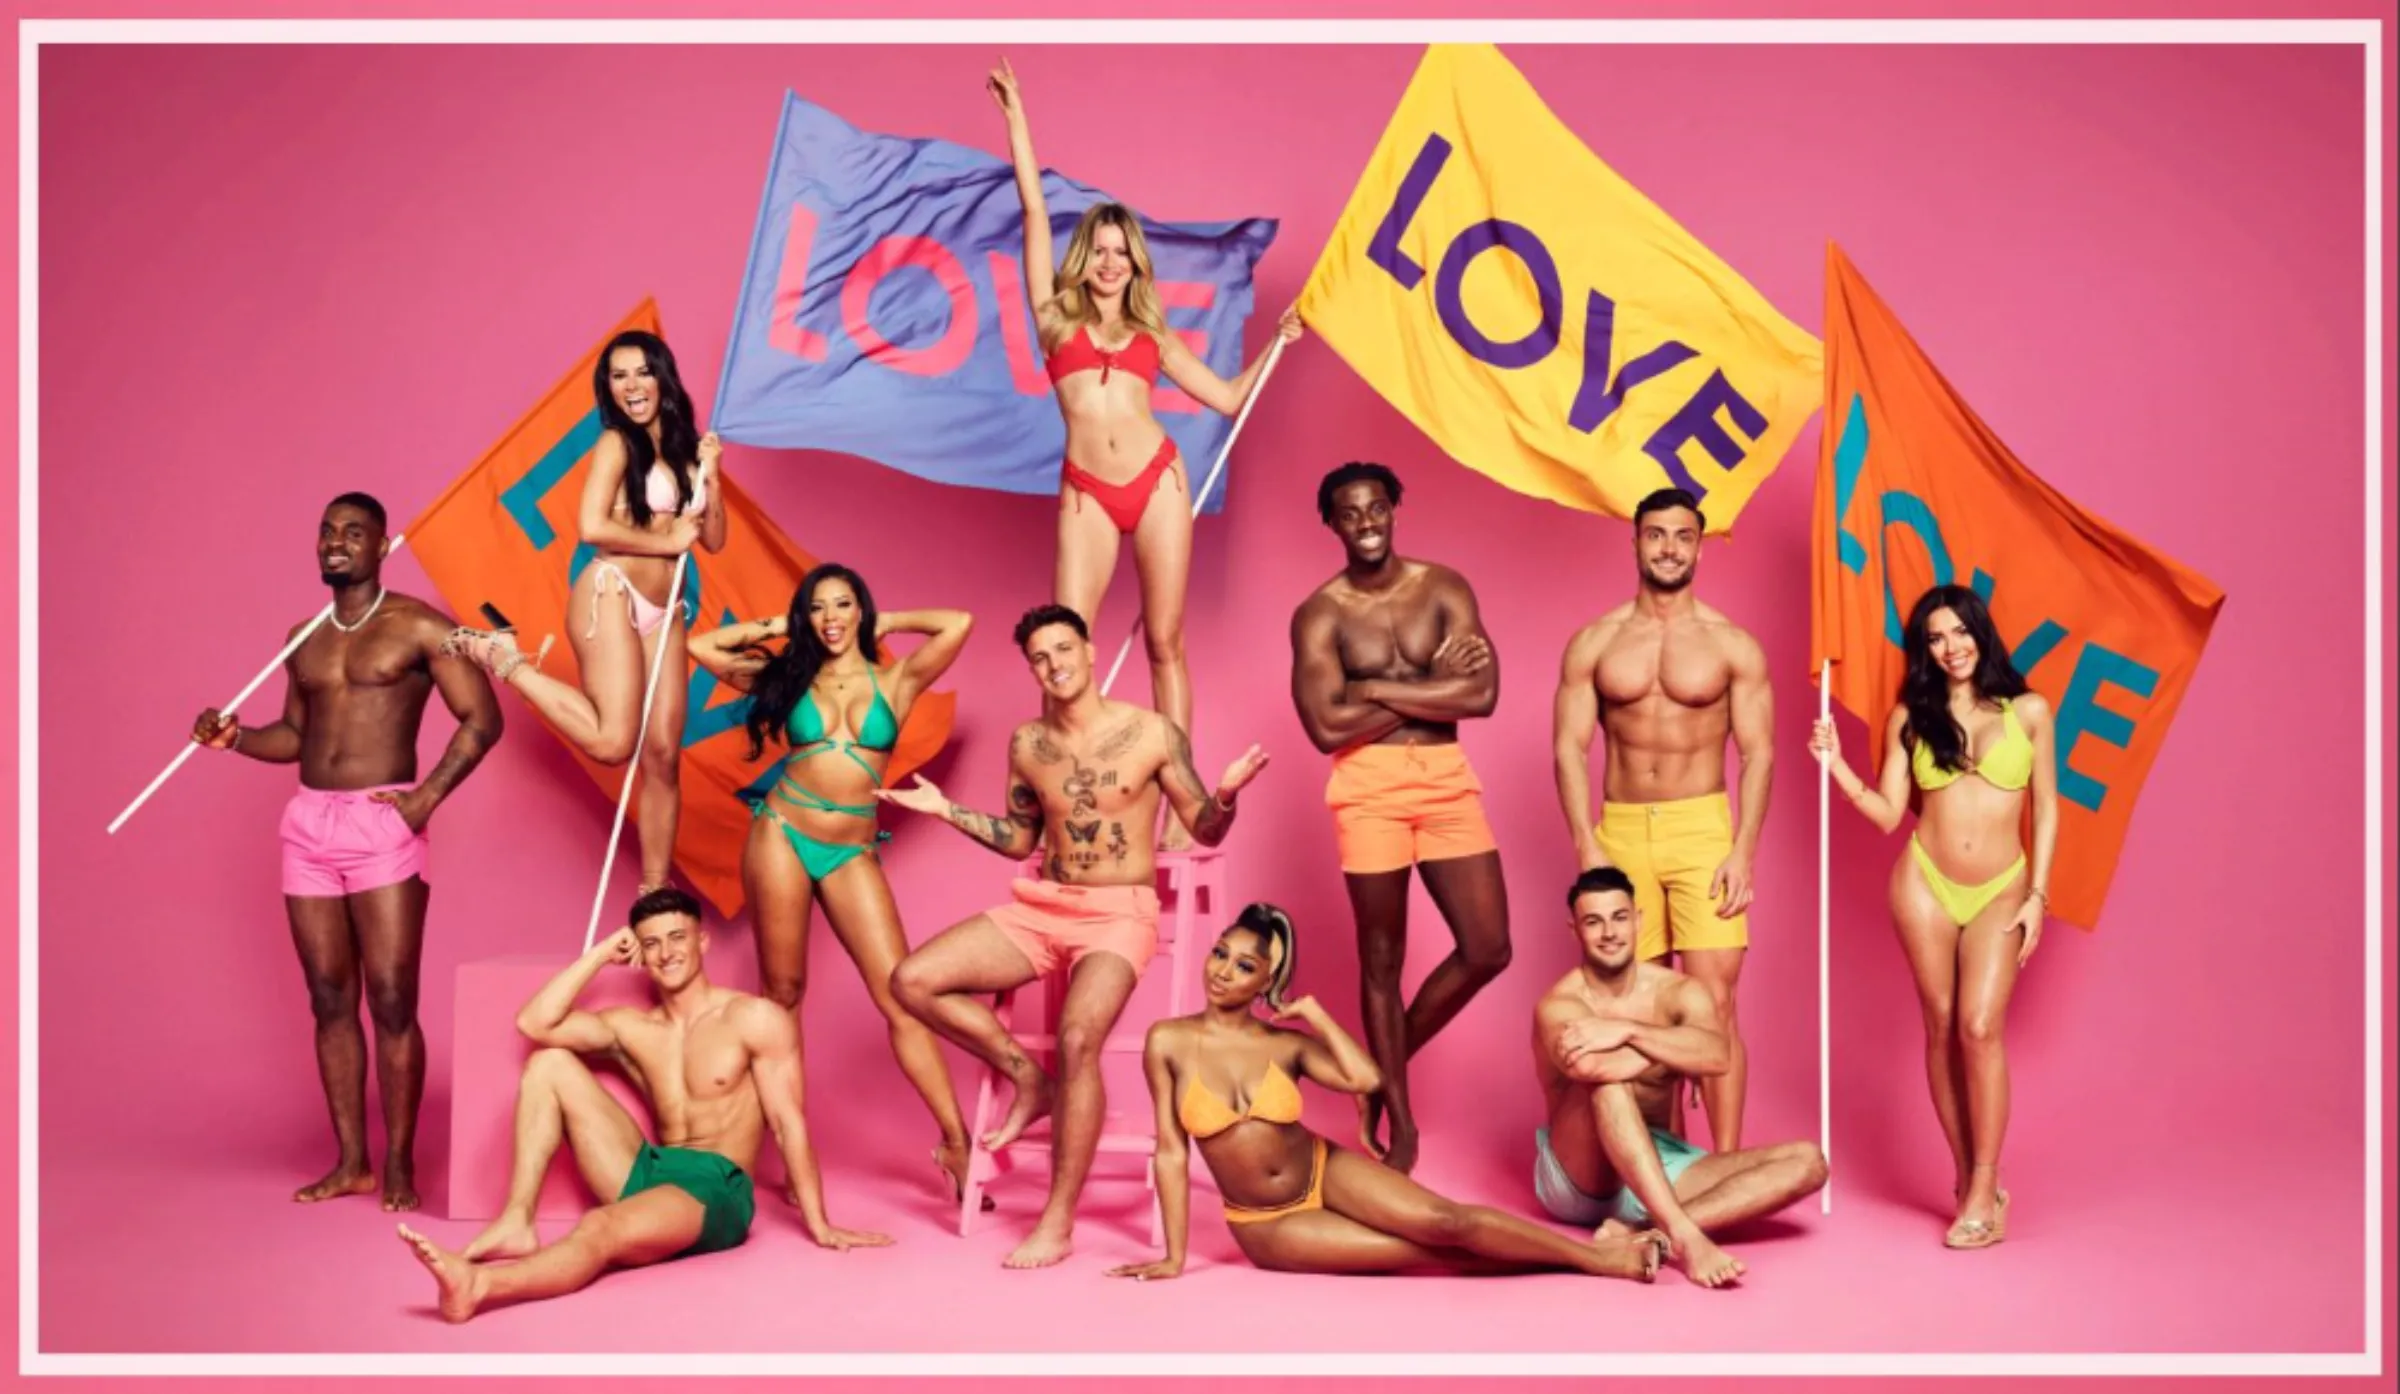 Love Island season 8 contestants pose for a promotional photo in an undated photograph. ITV/Handout via Thomson Reuters Foundation